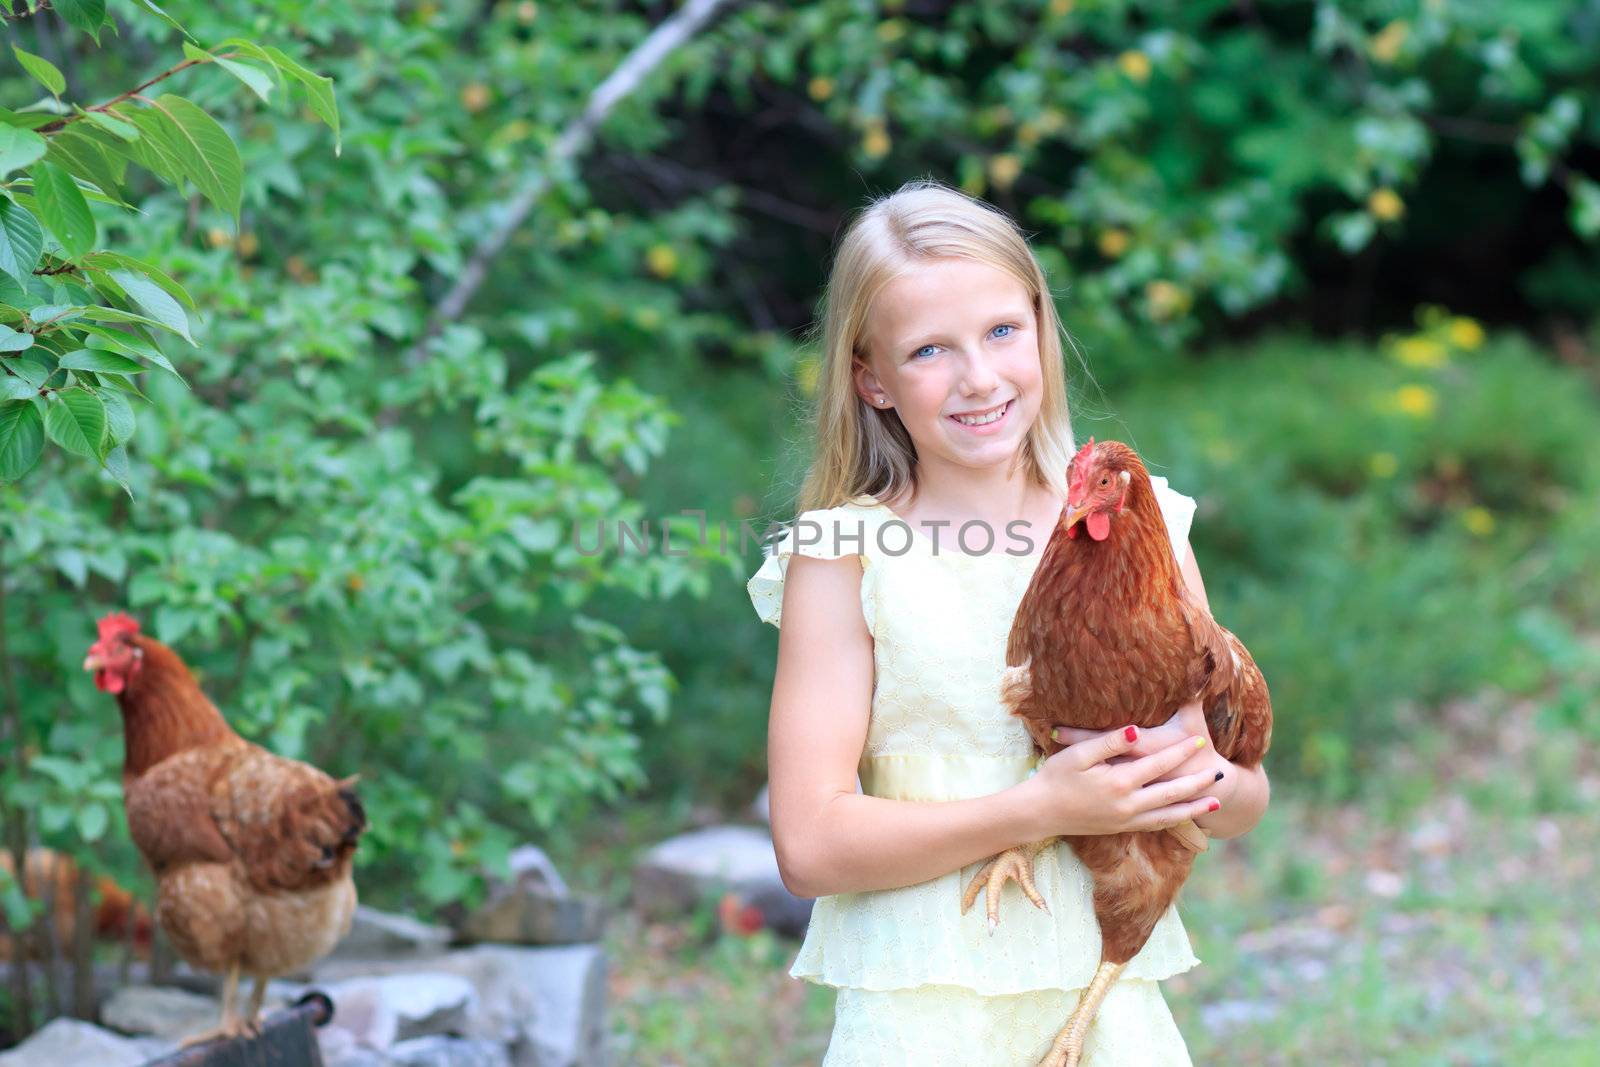 Young Blonde Girl in the Garden caring for Her Chickens in a Yellow Dress